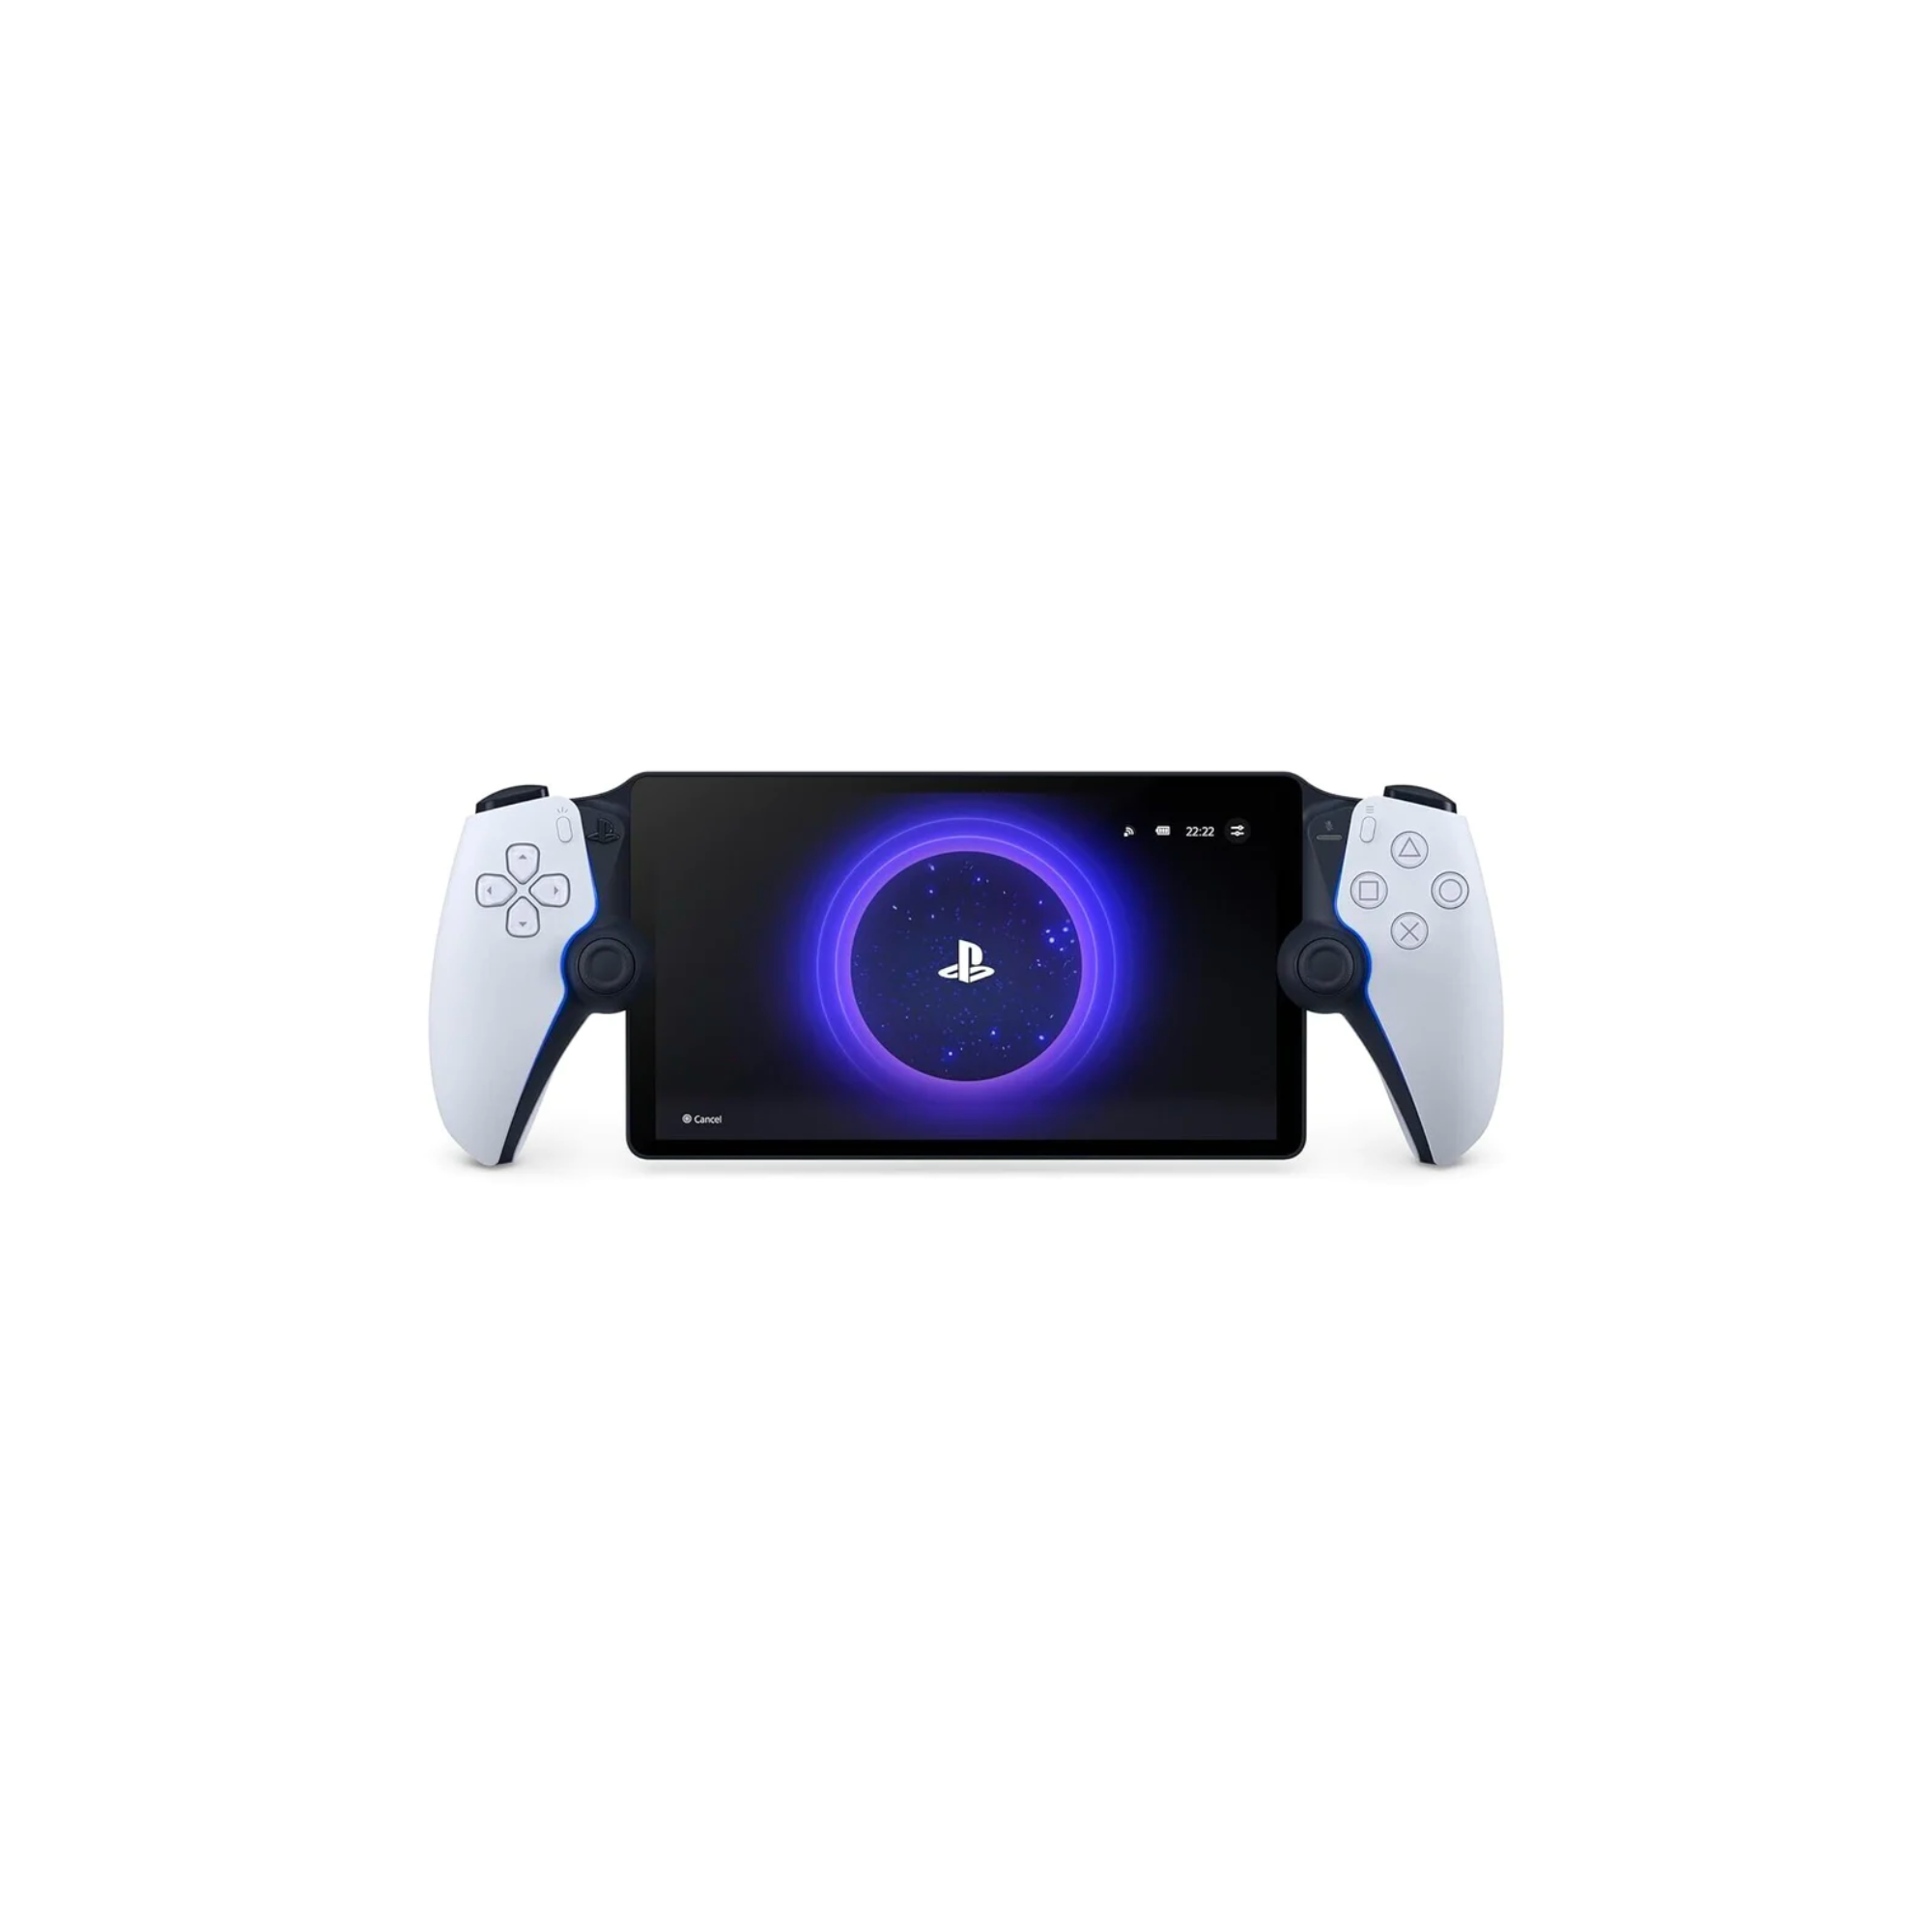 PlayStation®VR2  Sony Store Argentina - Sony Store Argentina